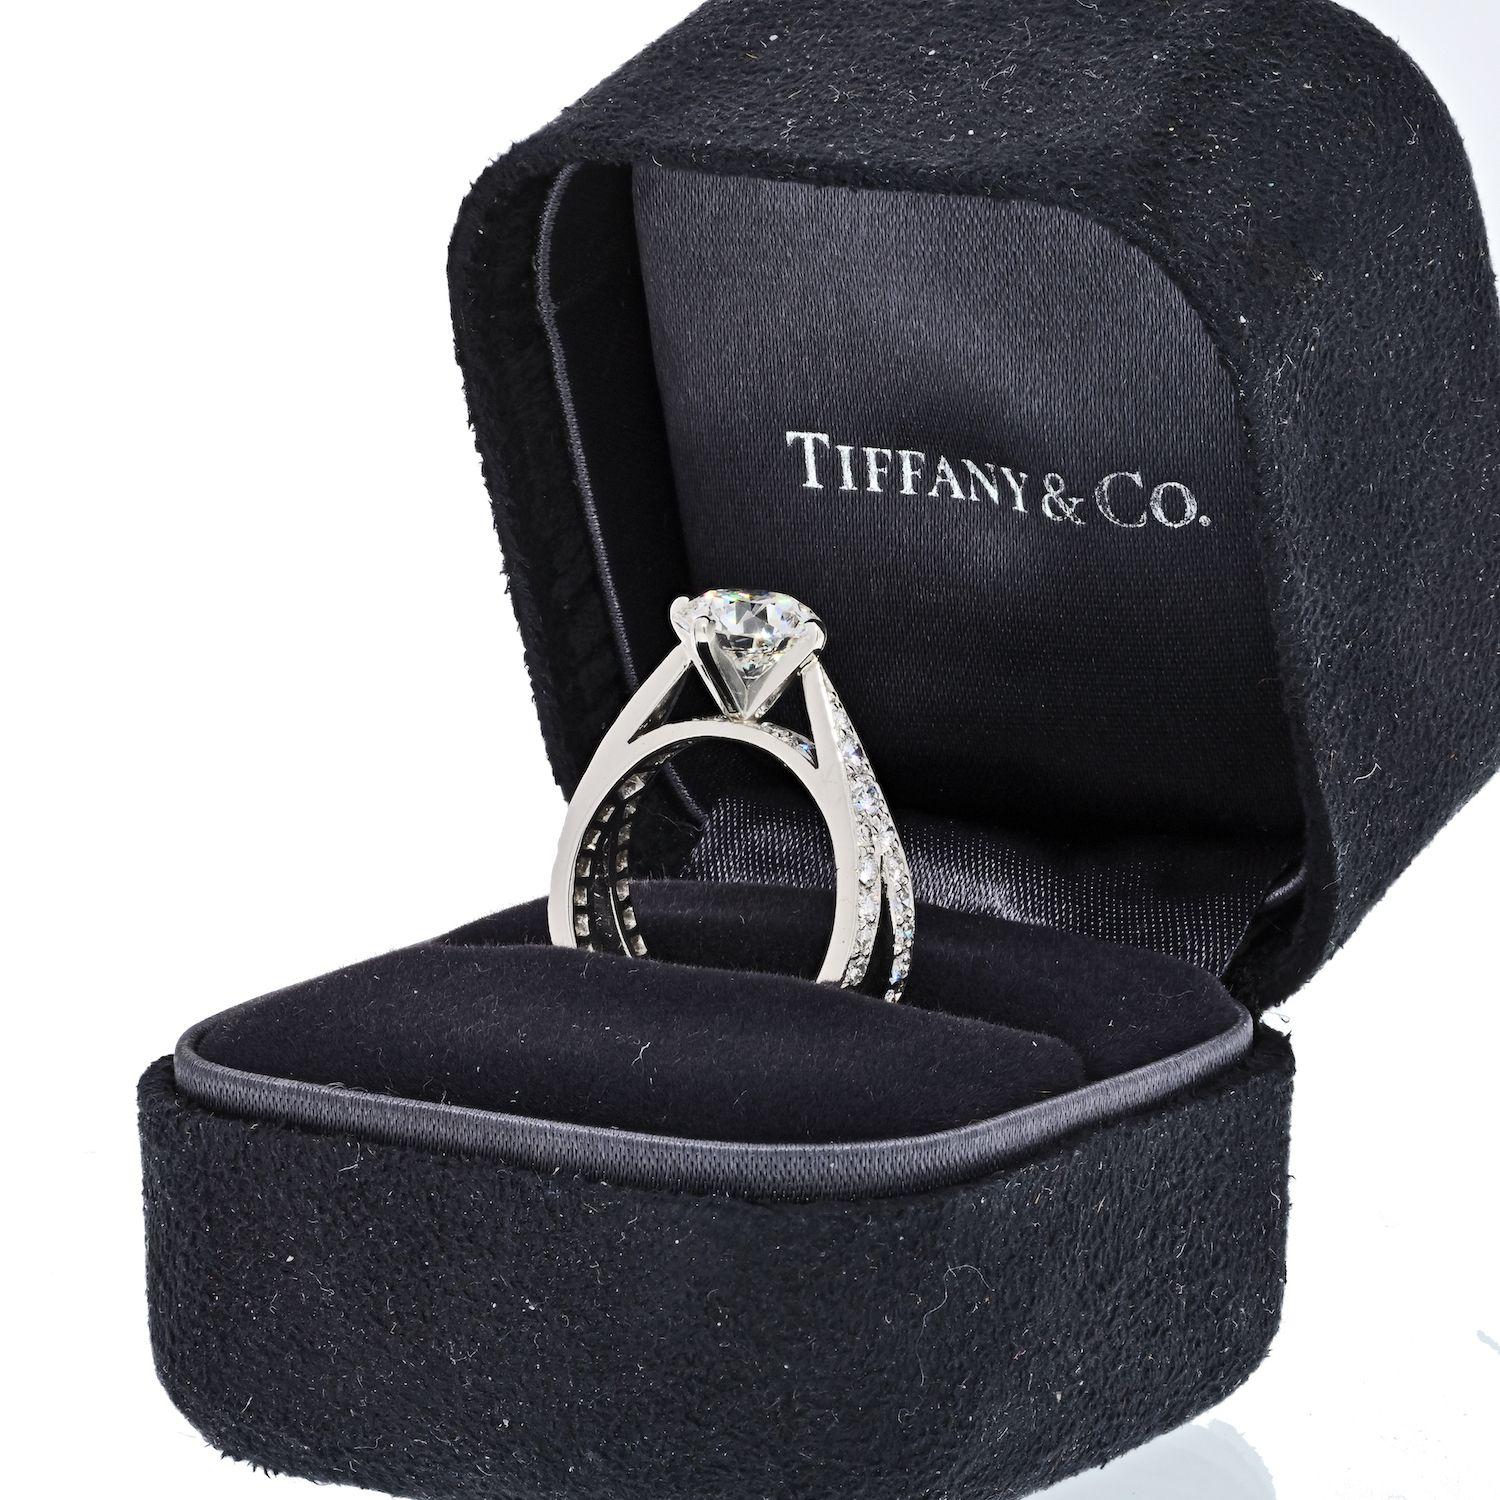 Modern Tiffany & Co. 1.79 Carat Round Diamond H/VVS1 GIA Engagement Ring For Sale